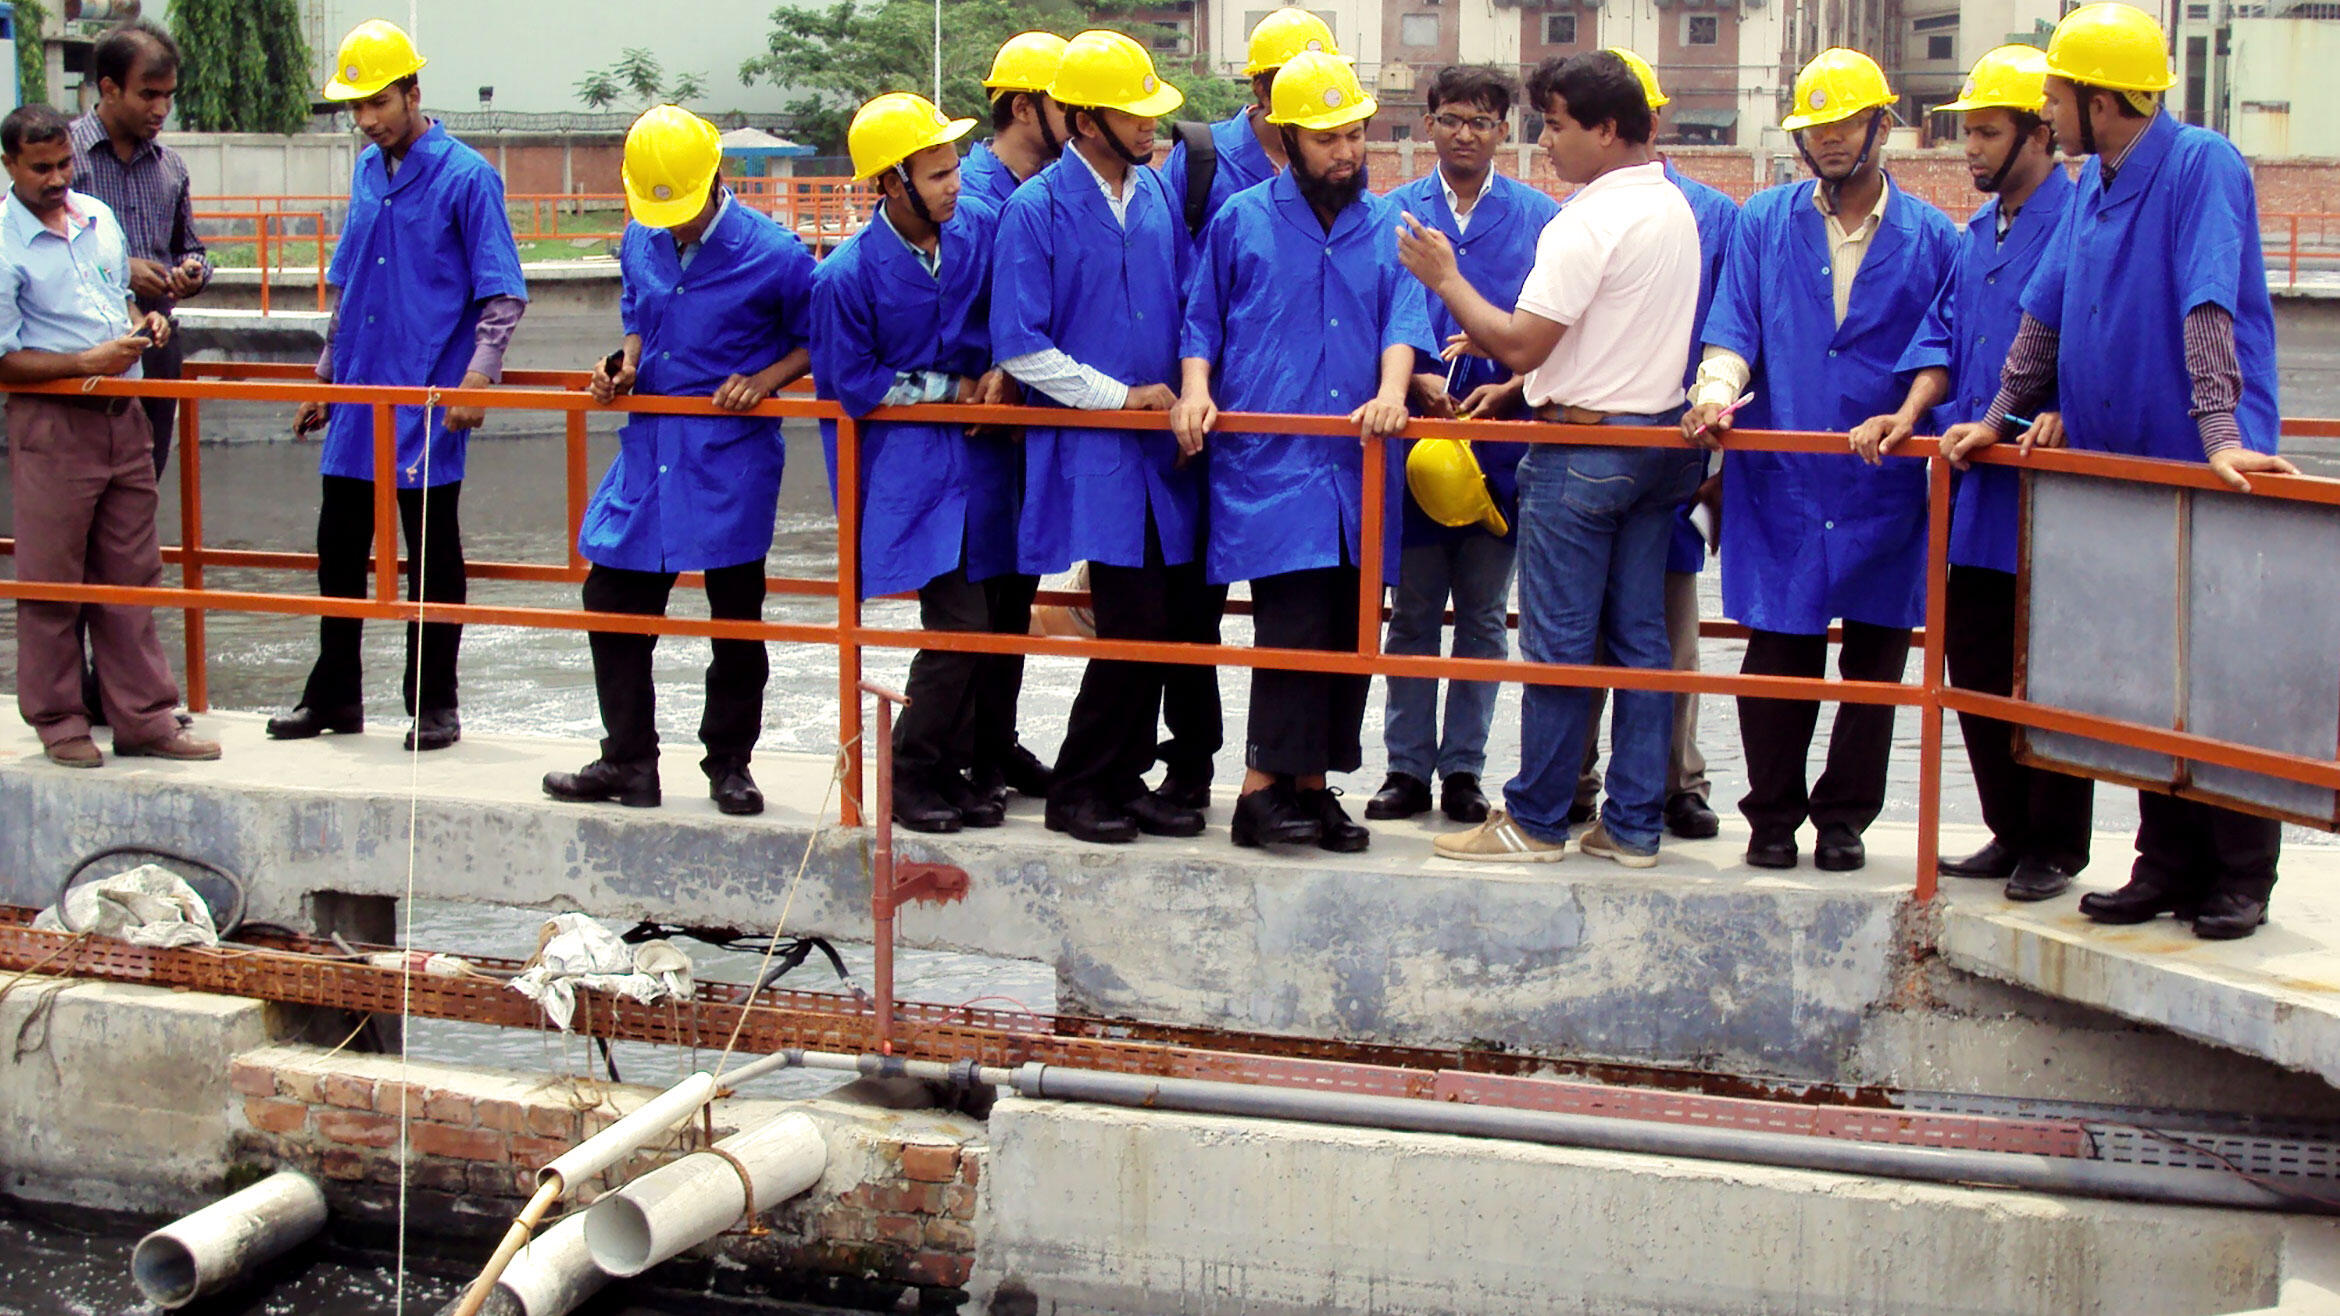 men in work clothes and protective helmets inspect a part of a sewage plant